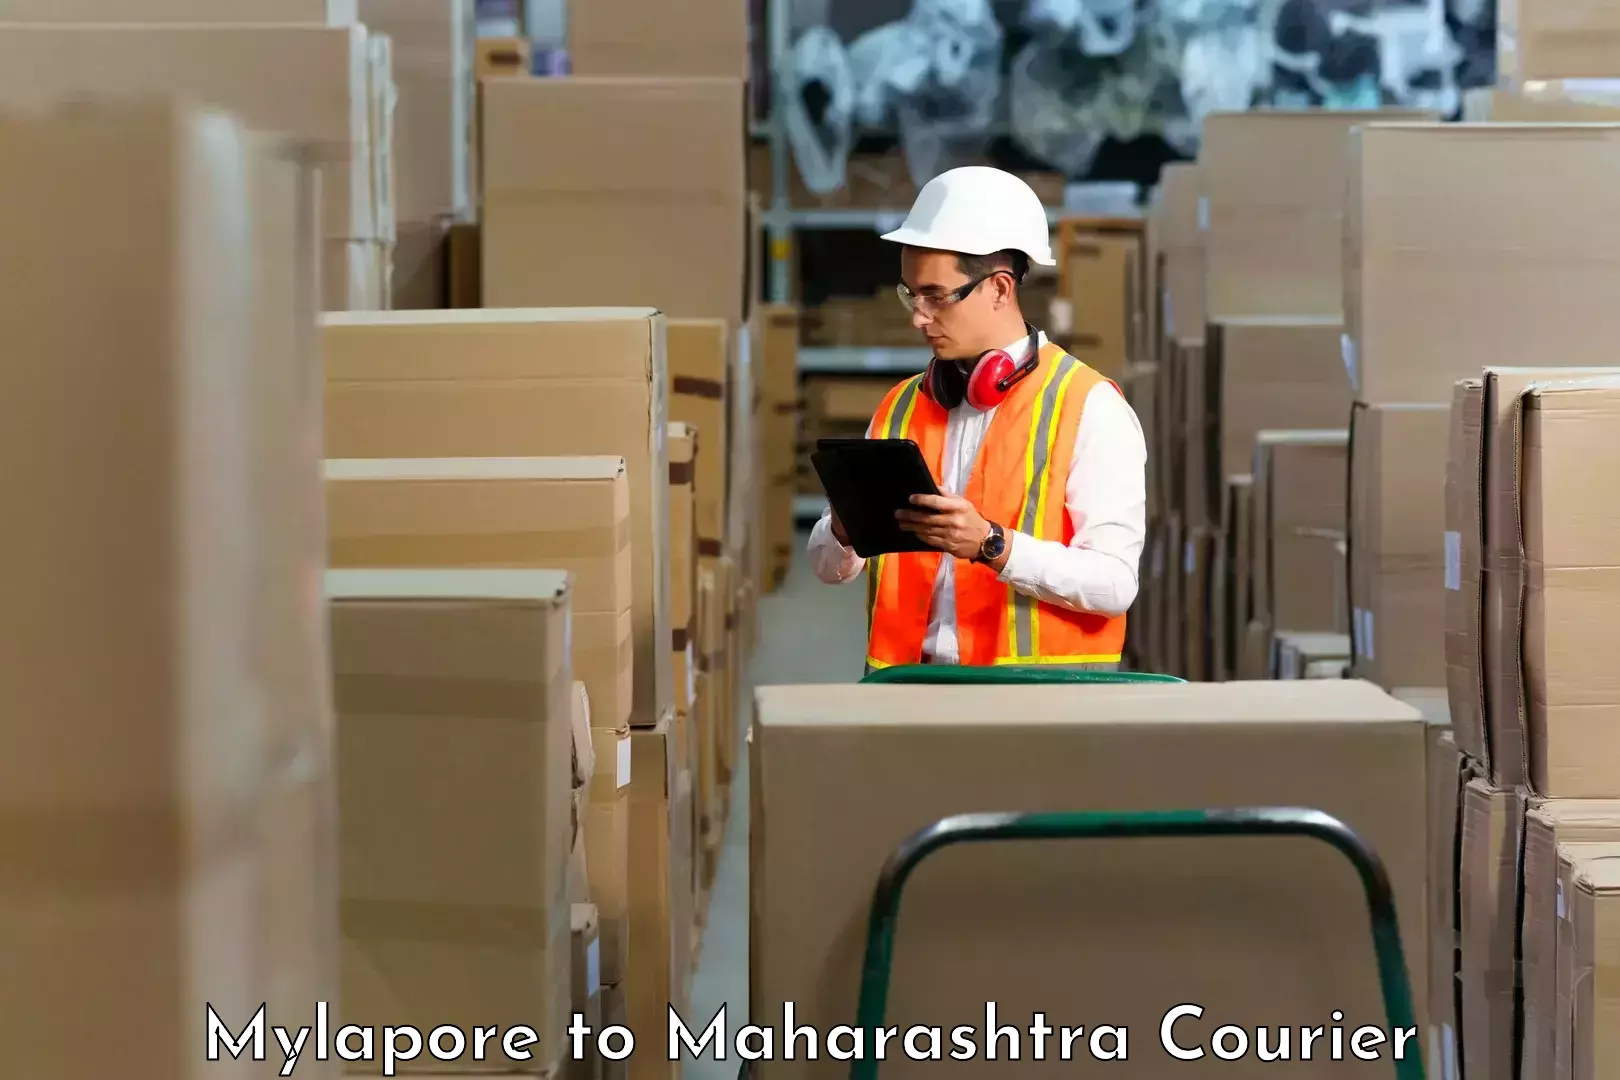 Tech-enabled shipping Mylapore to Dusarbid